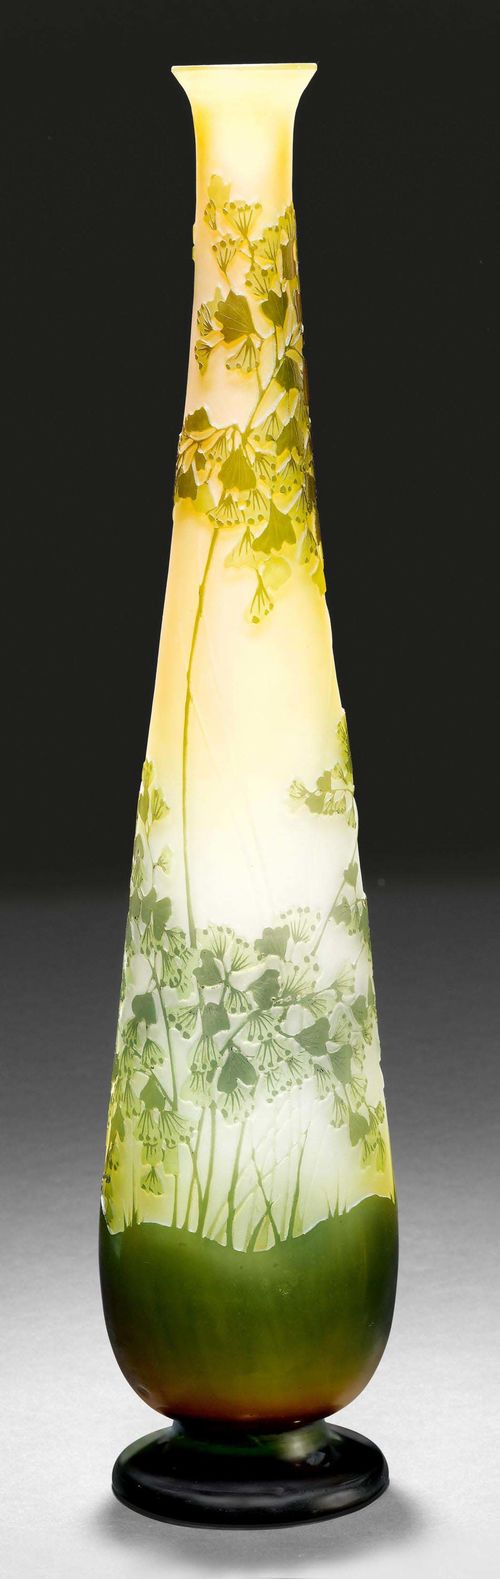 EMILE GALLE VASE, ca. 1900. Yellow glass with green overlay and etching. Conical vase, decorated with ferns. Signed Gallé. H 49.5 cm.